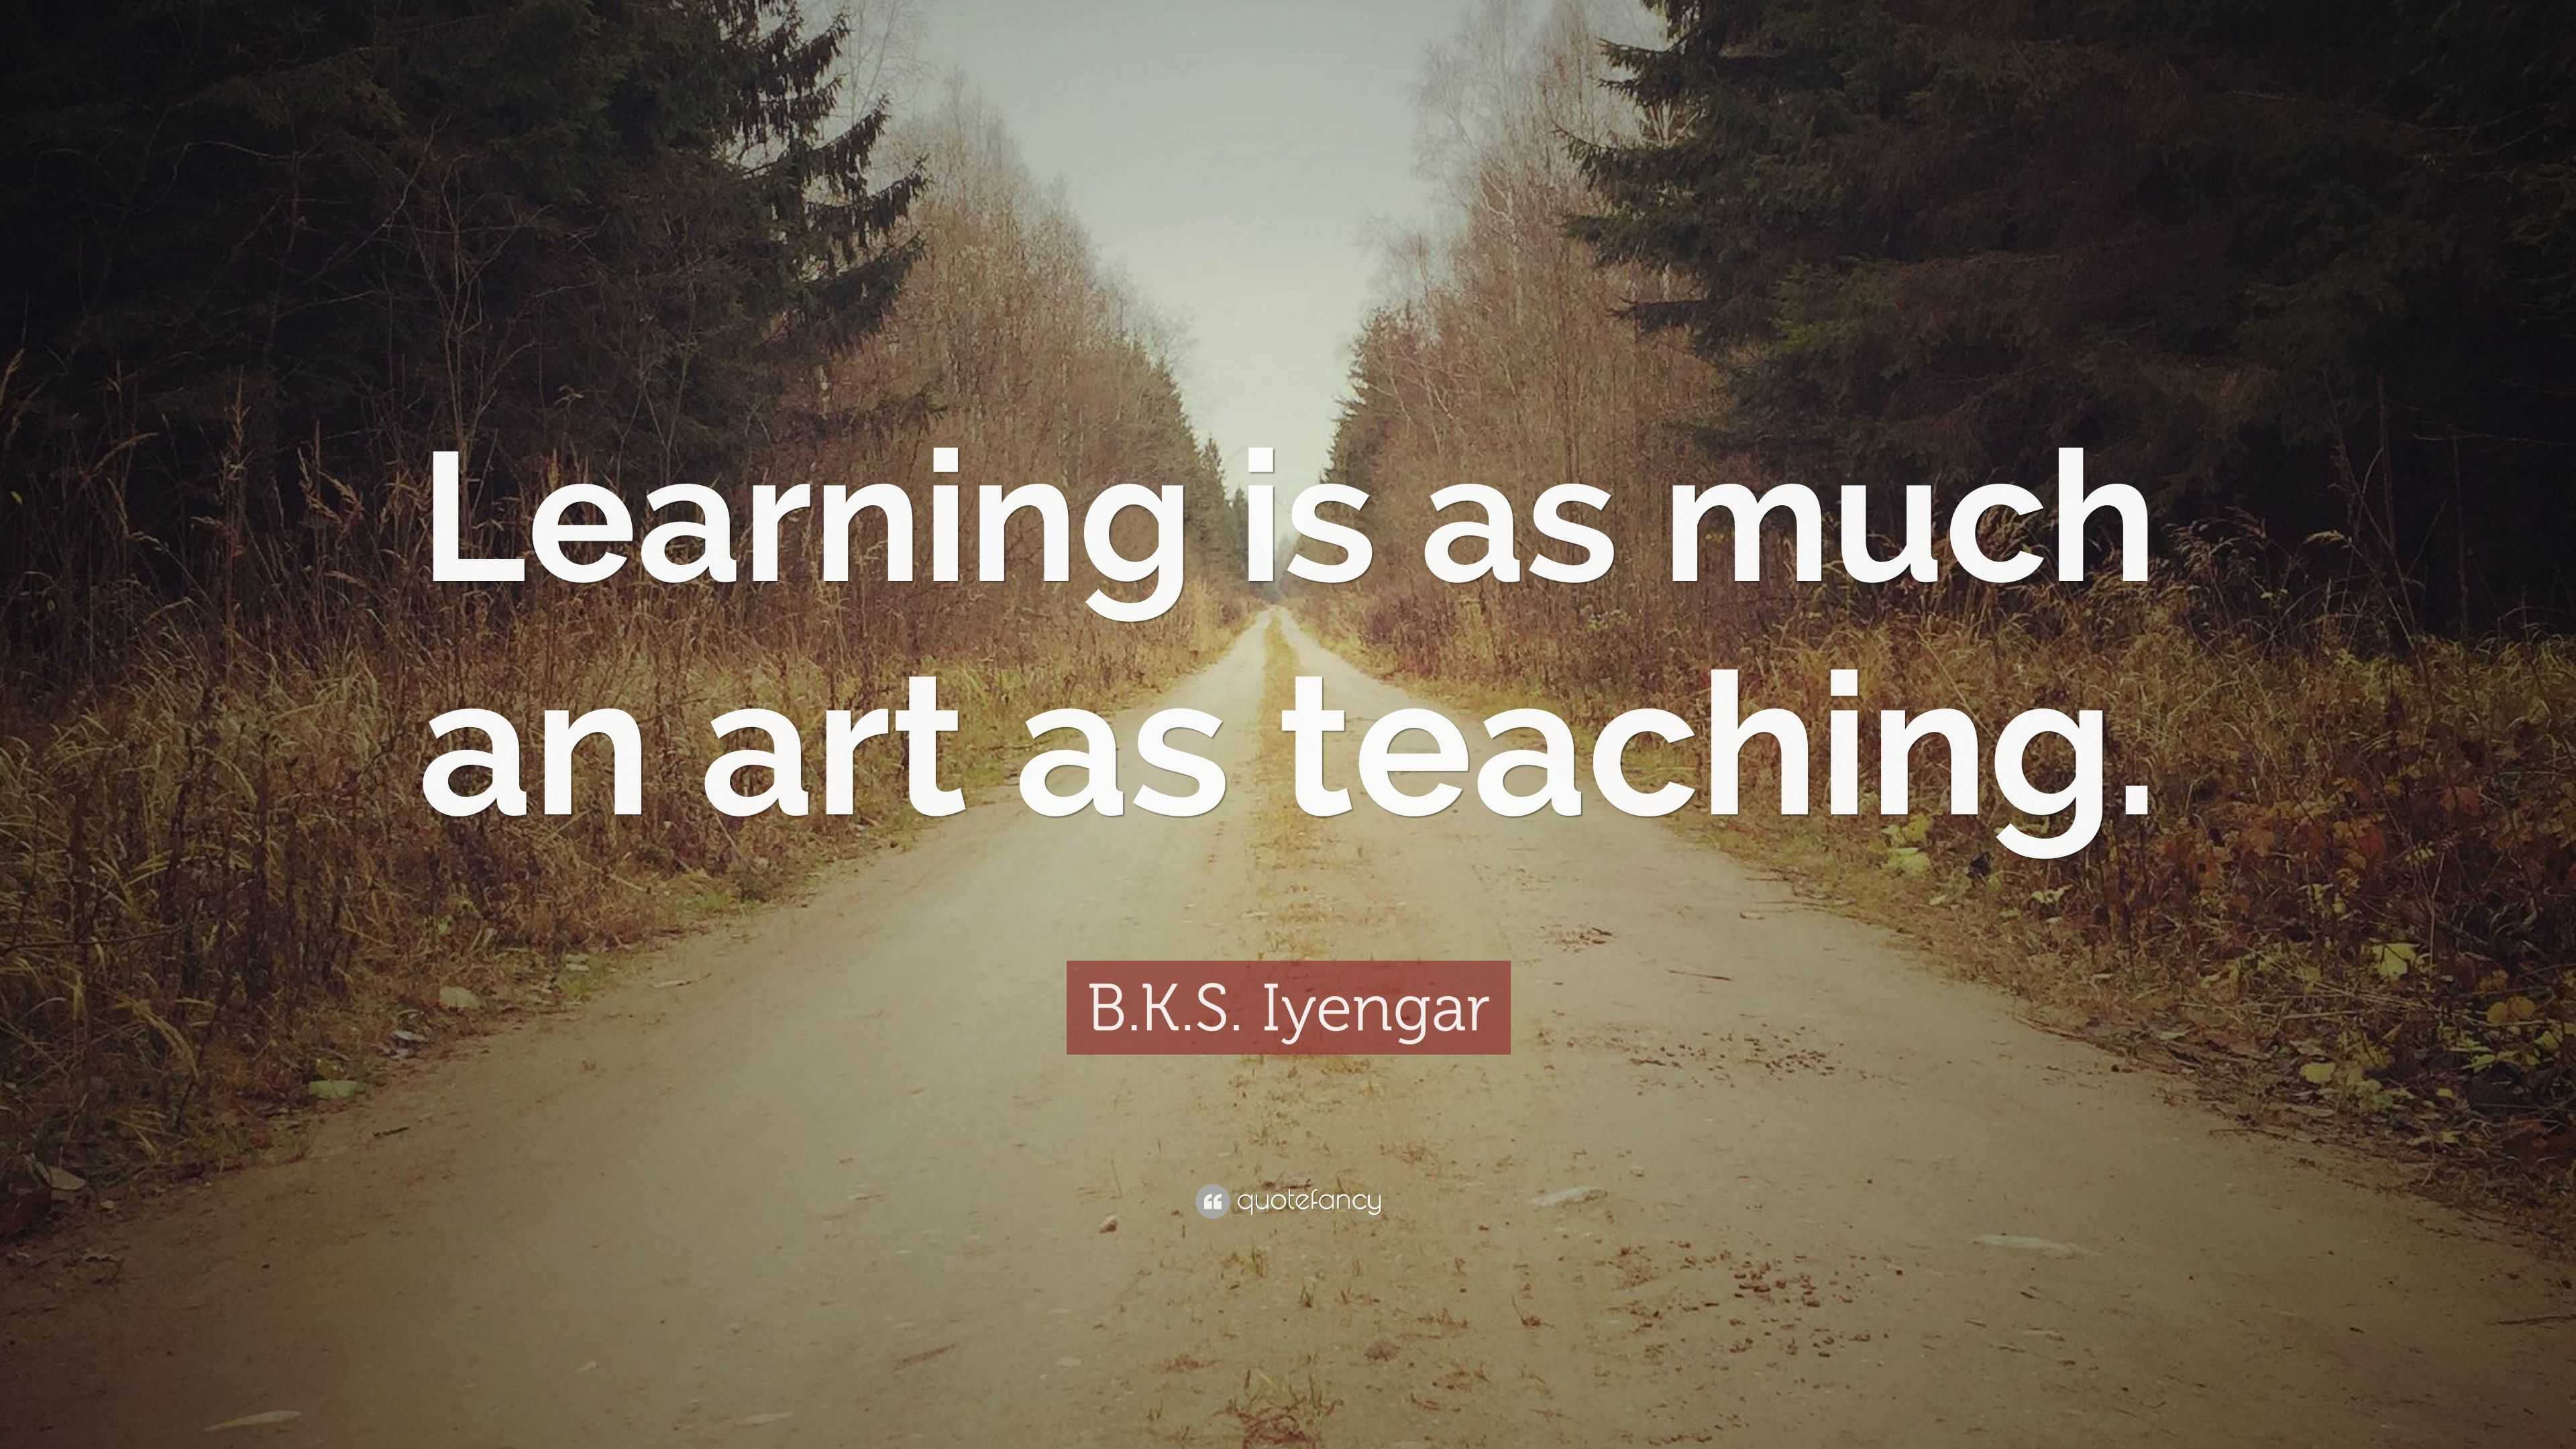 B.K.S. Iyengar Quote: “The art of teaching is tolerance. Humbleness is the  art of learning.”